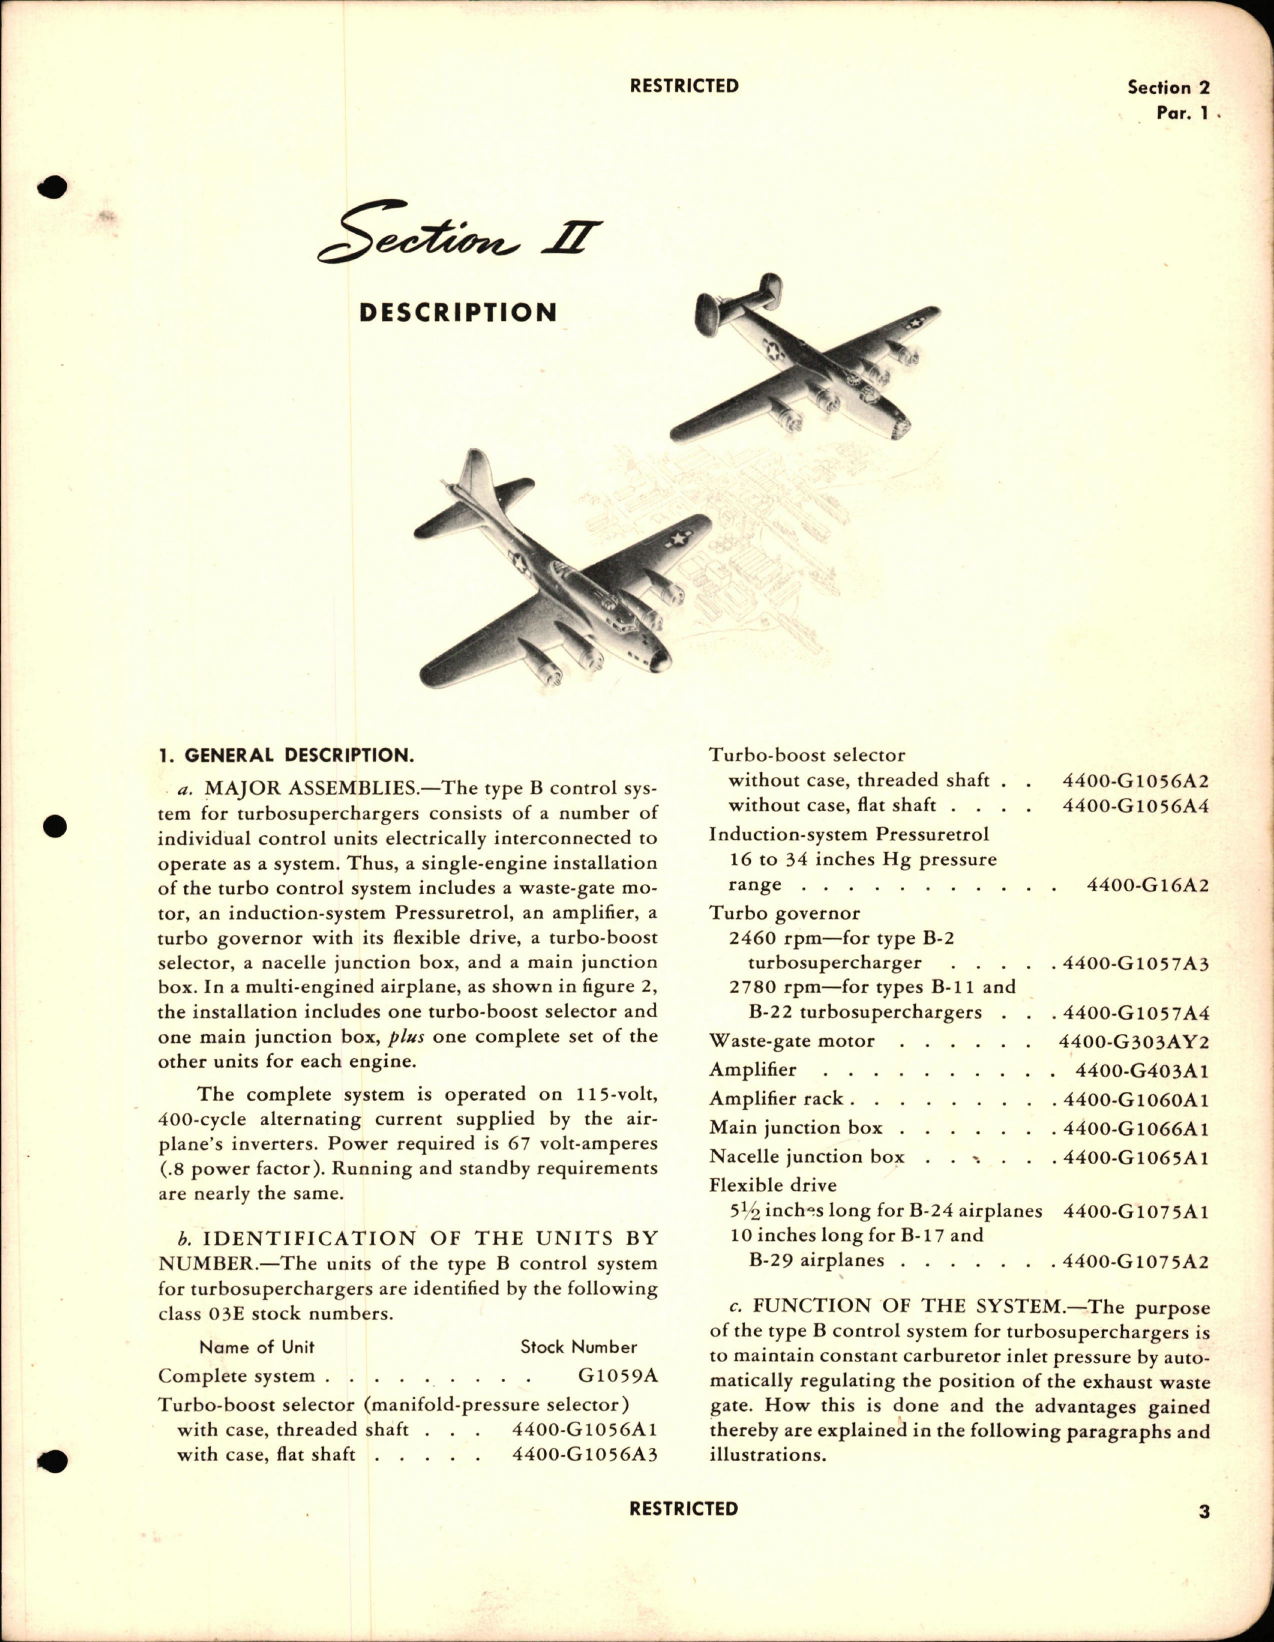 Sample page 7 from AirCorps Library document: Operation and Service Instructions for Electronic Control System Turbosuperchargers Type B